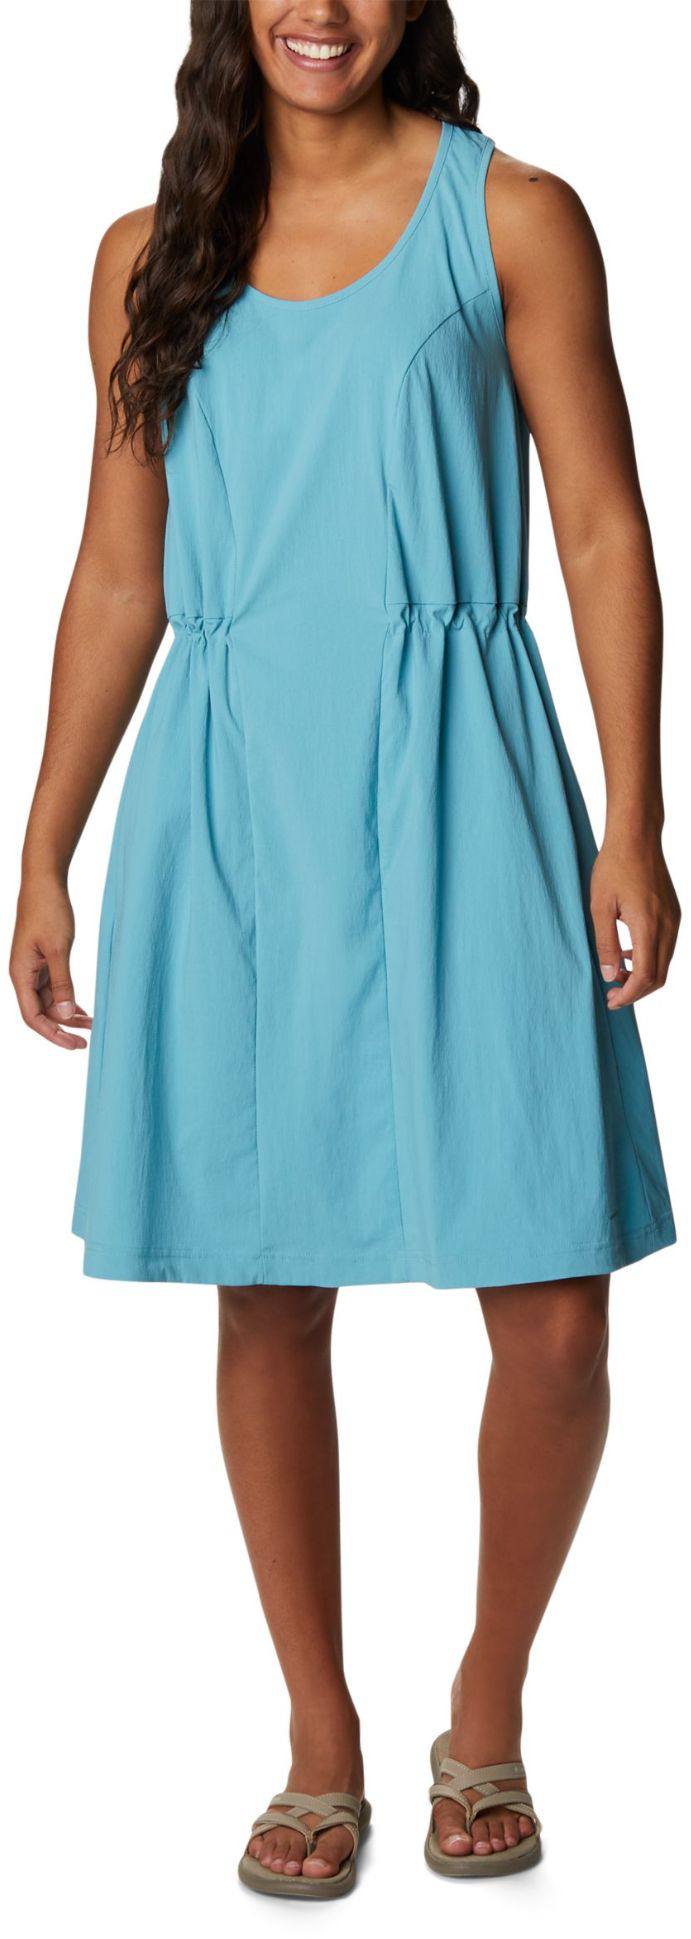 Image of Columbia Women's On The Go Dress